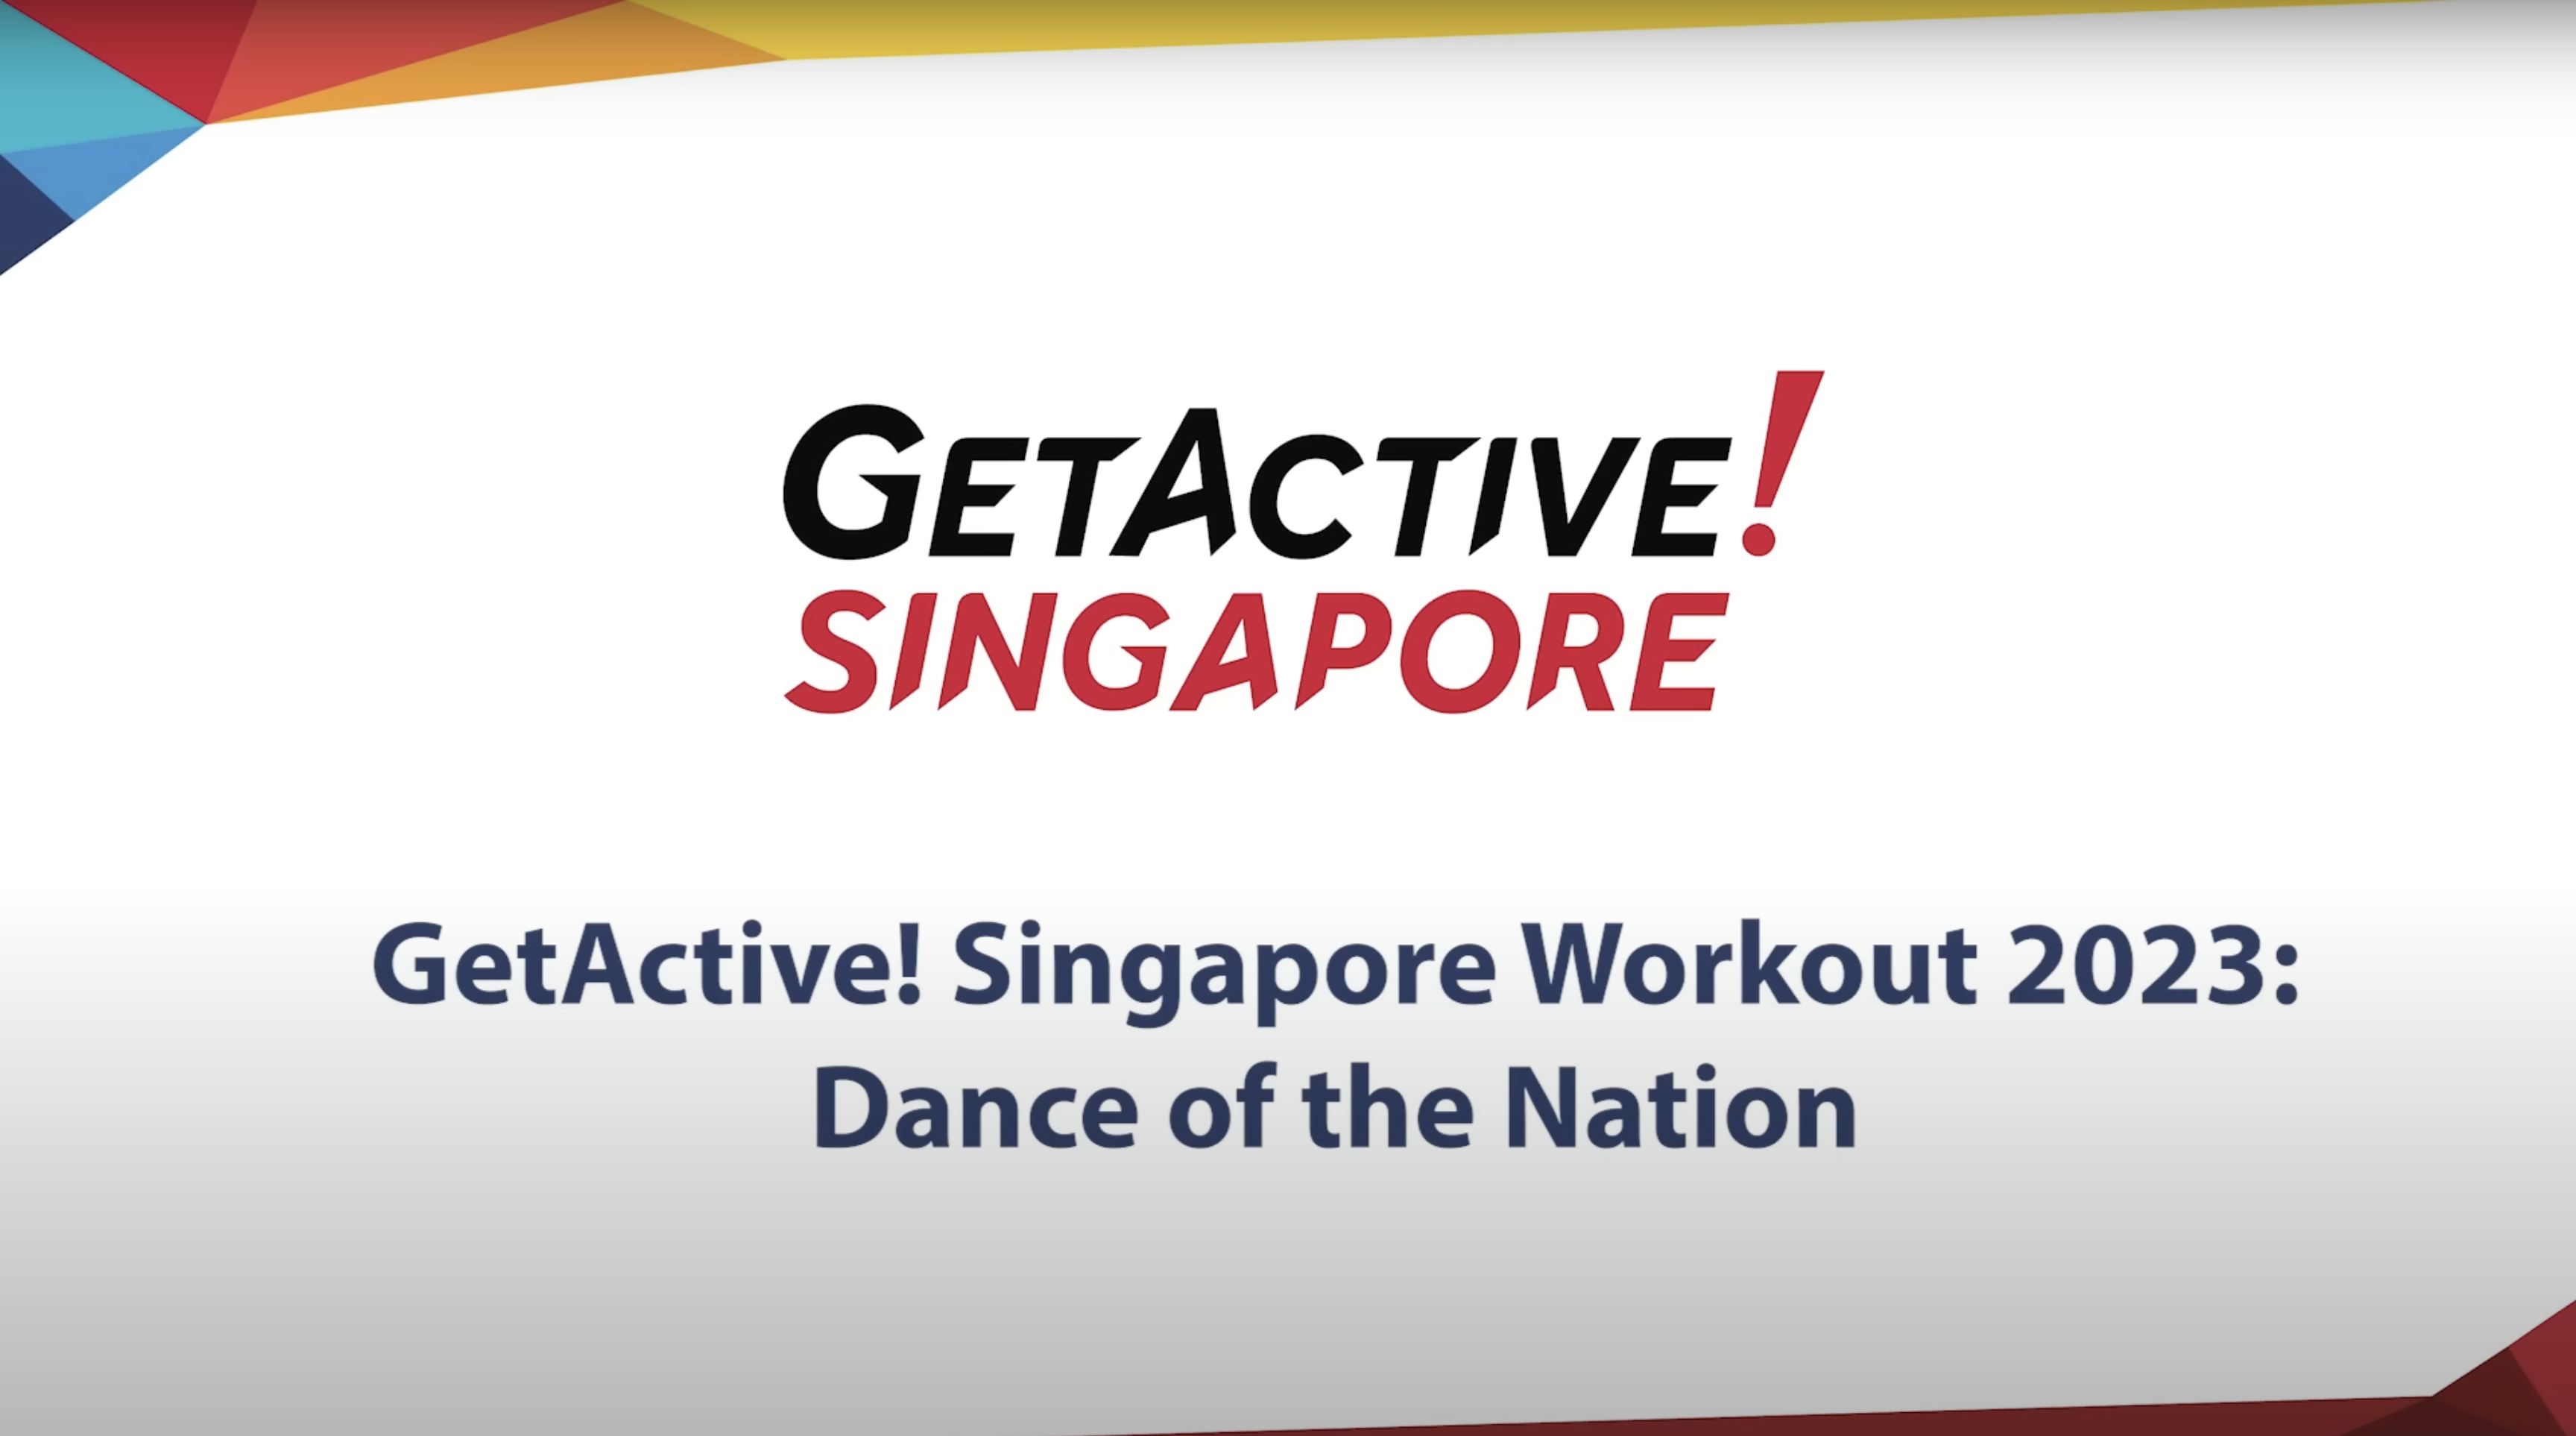 GetActive! Singapore Workout 2023: Dance of the Nation